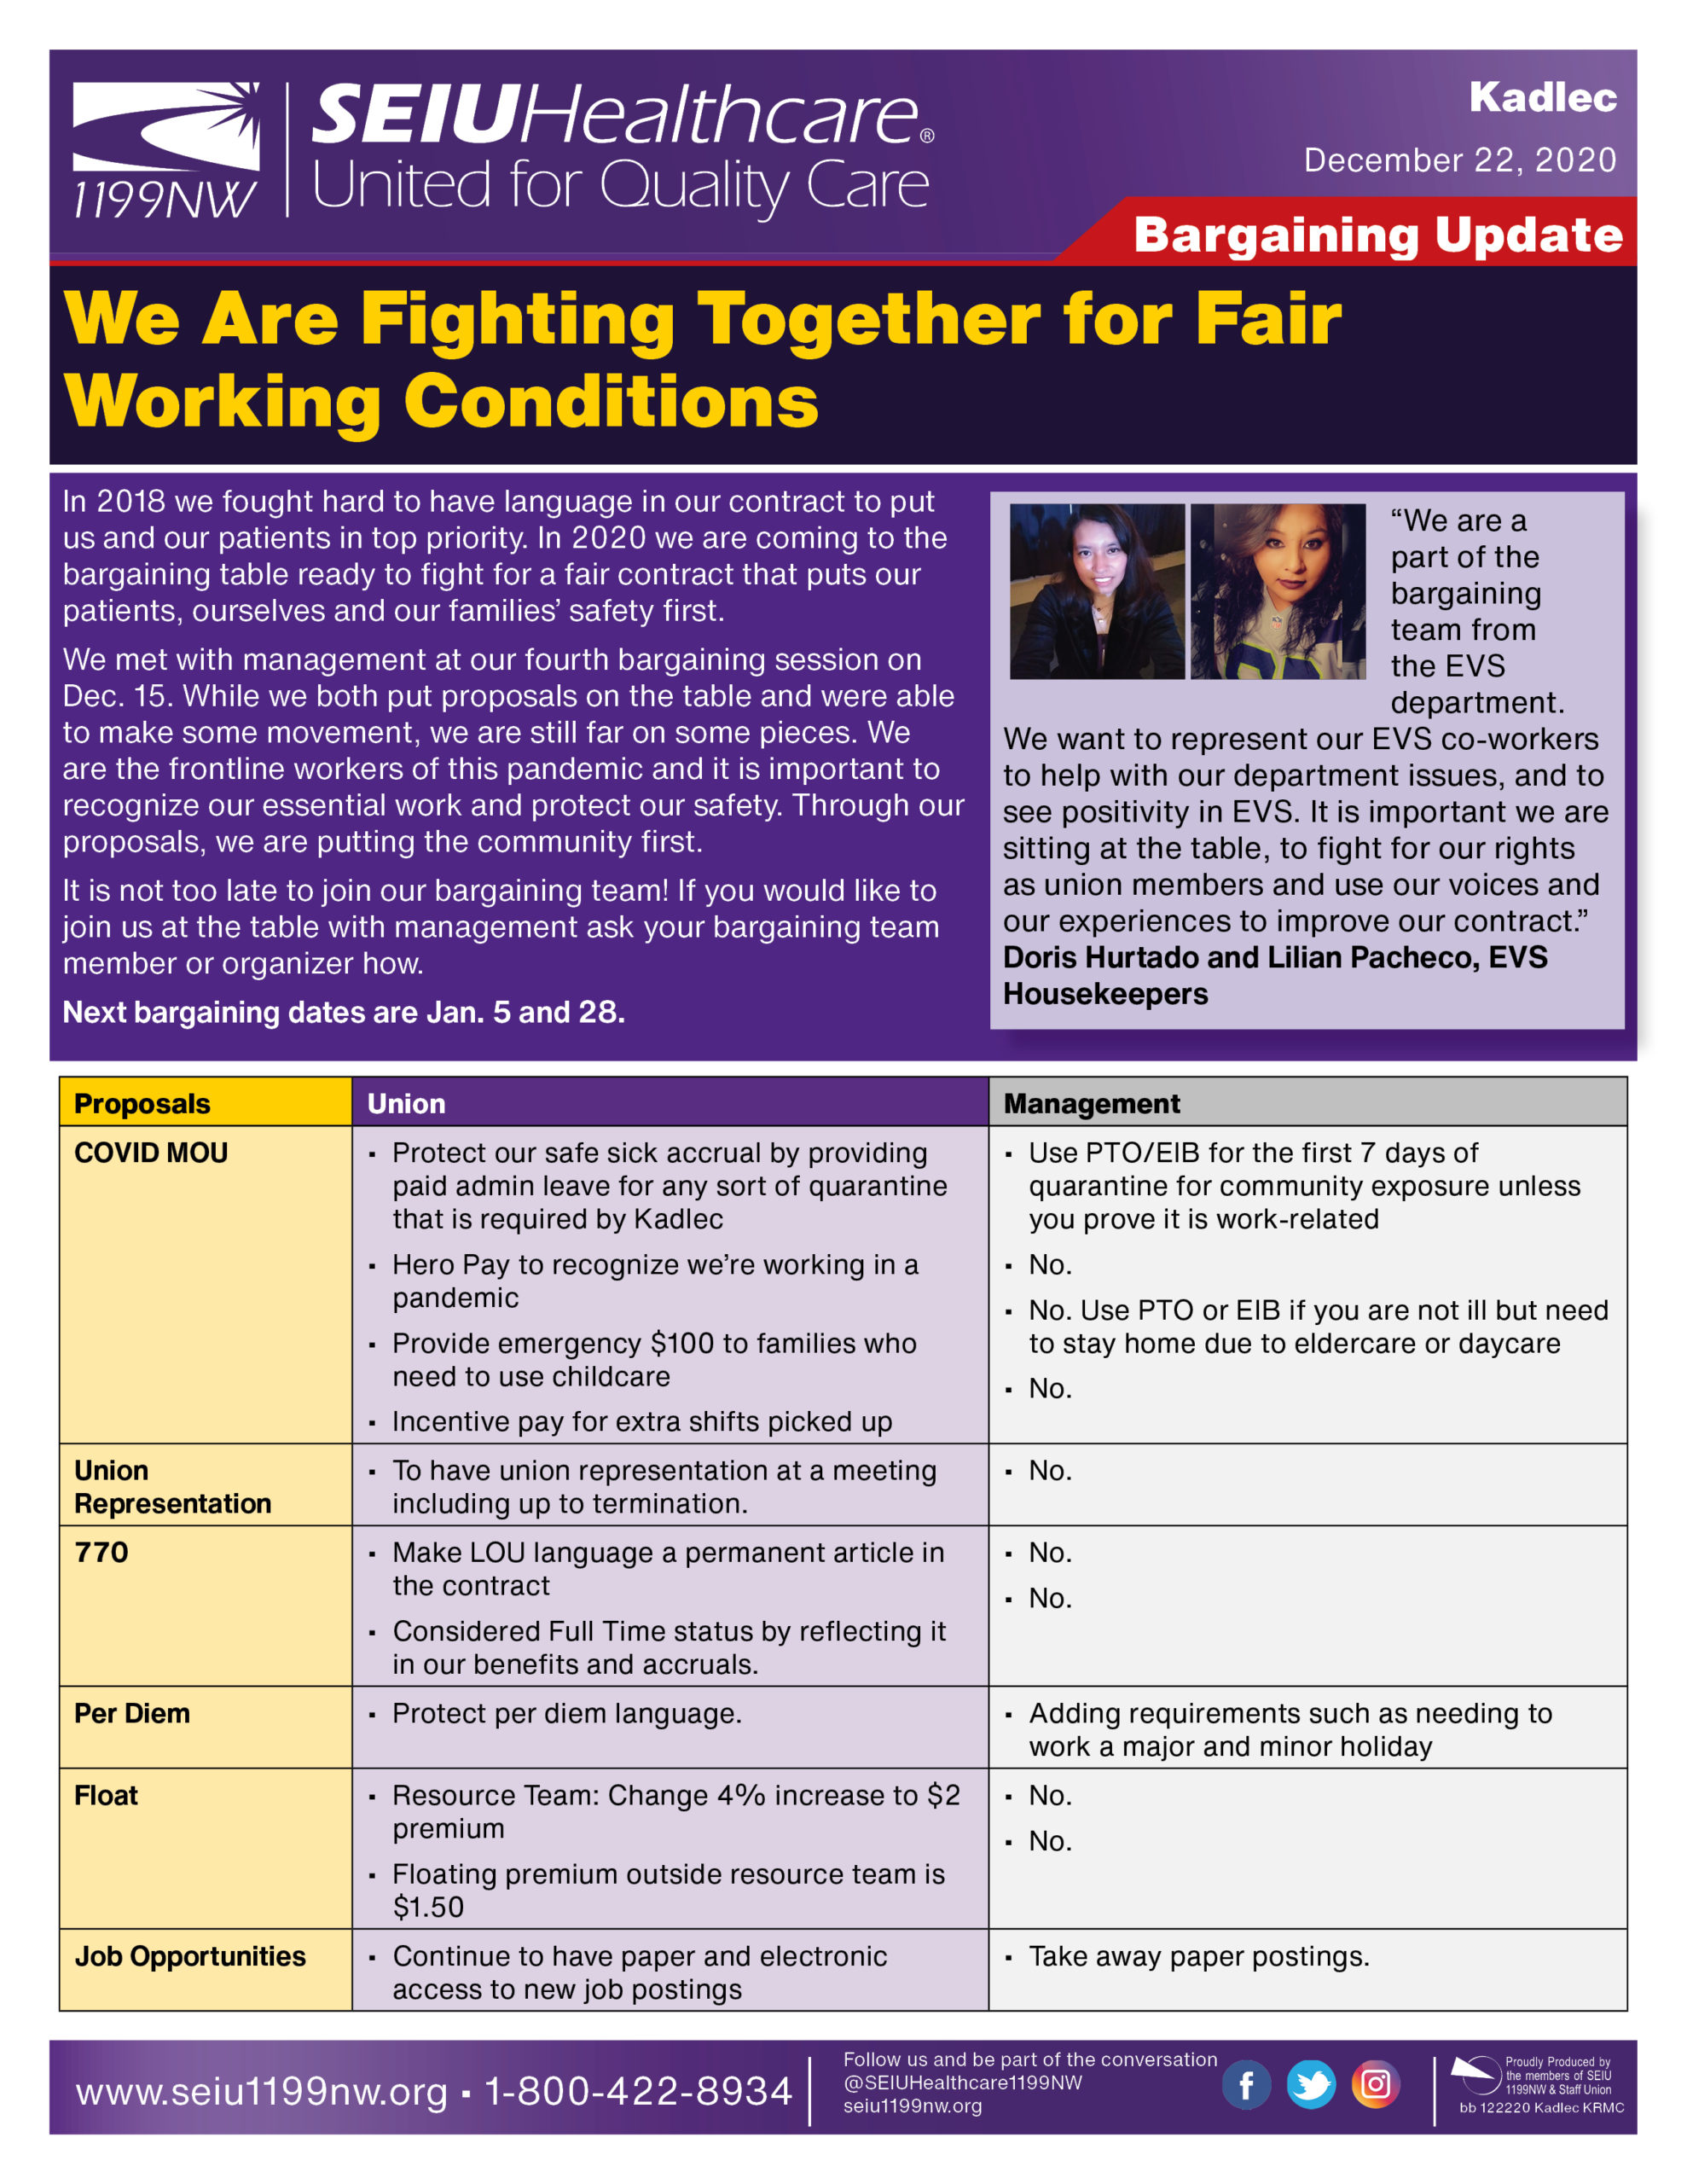 We Are Fighting Together for Fair Working Conditions